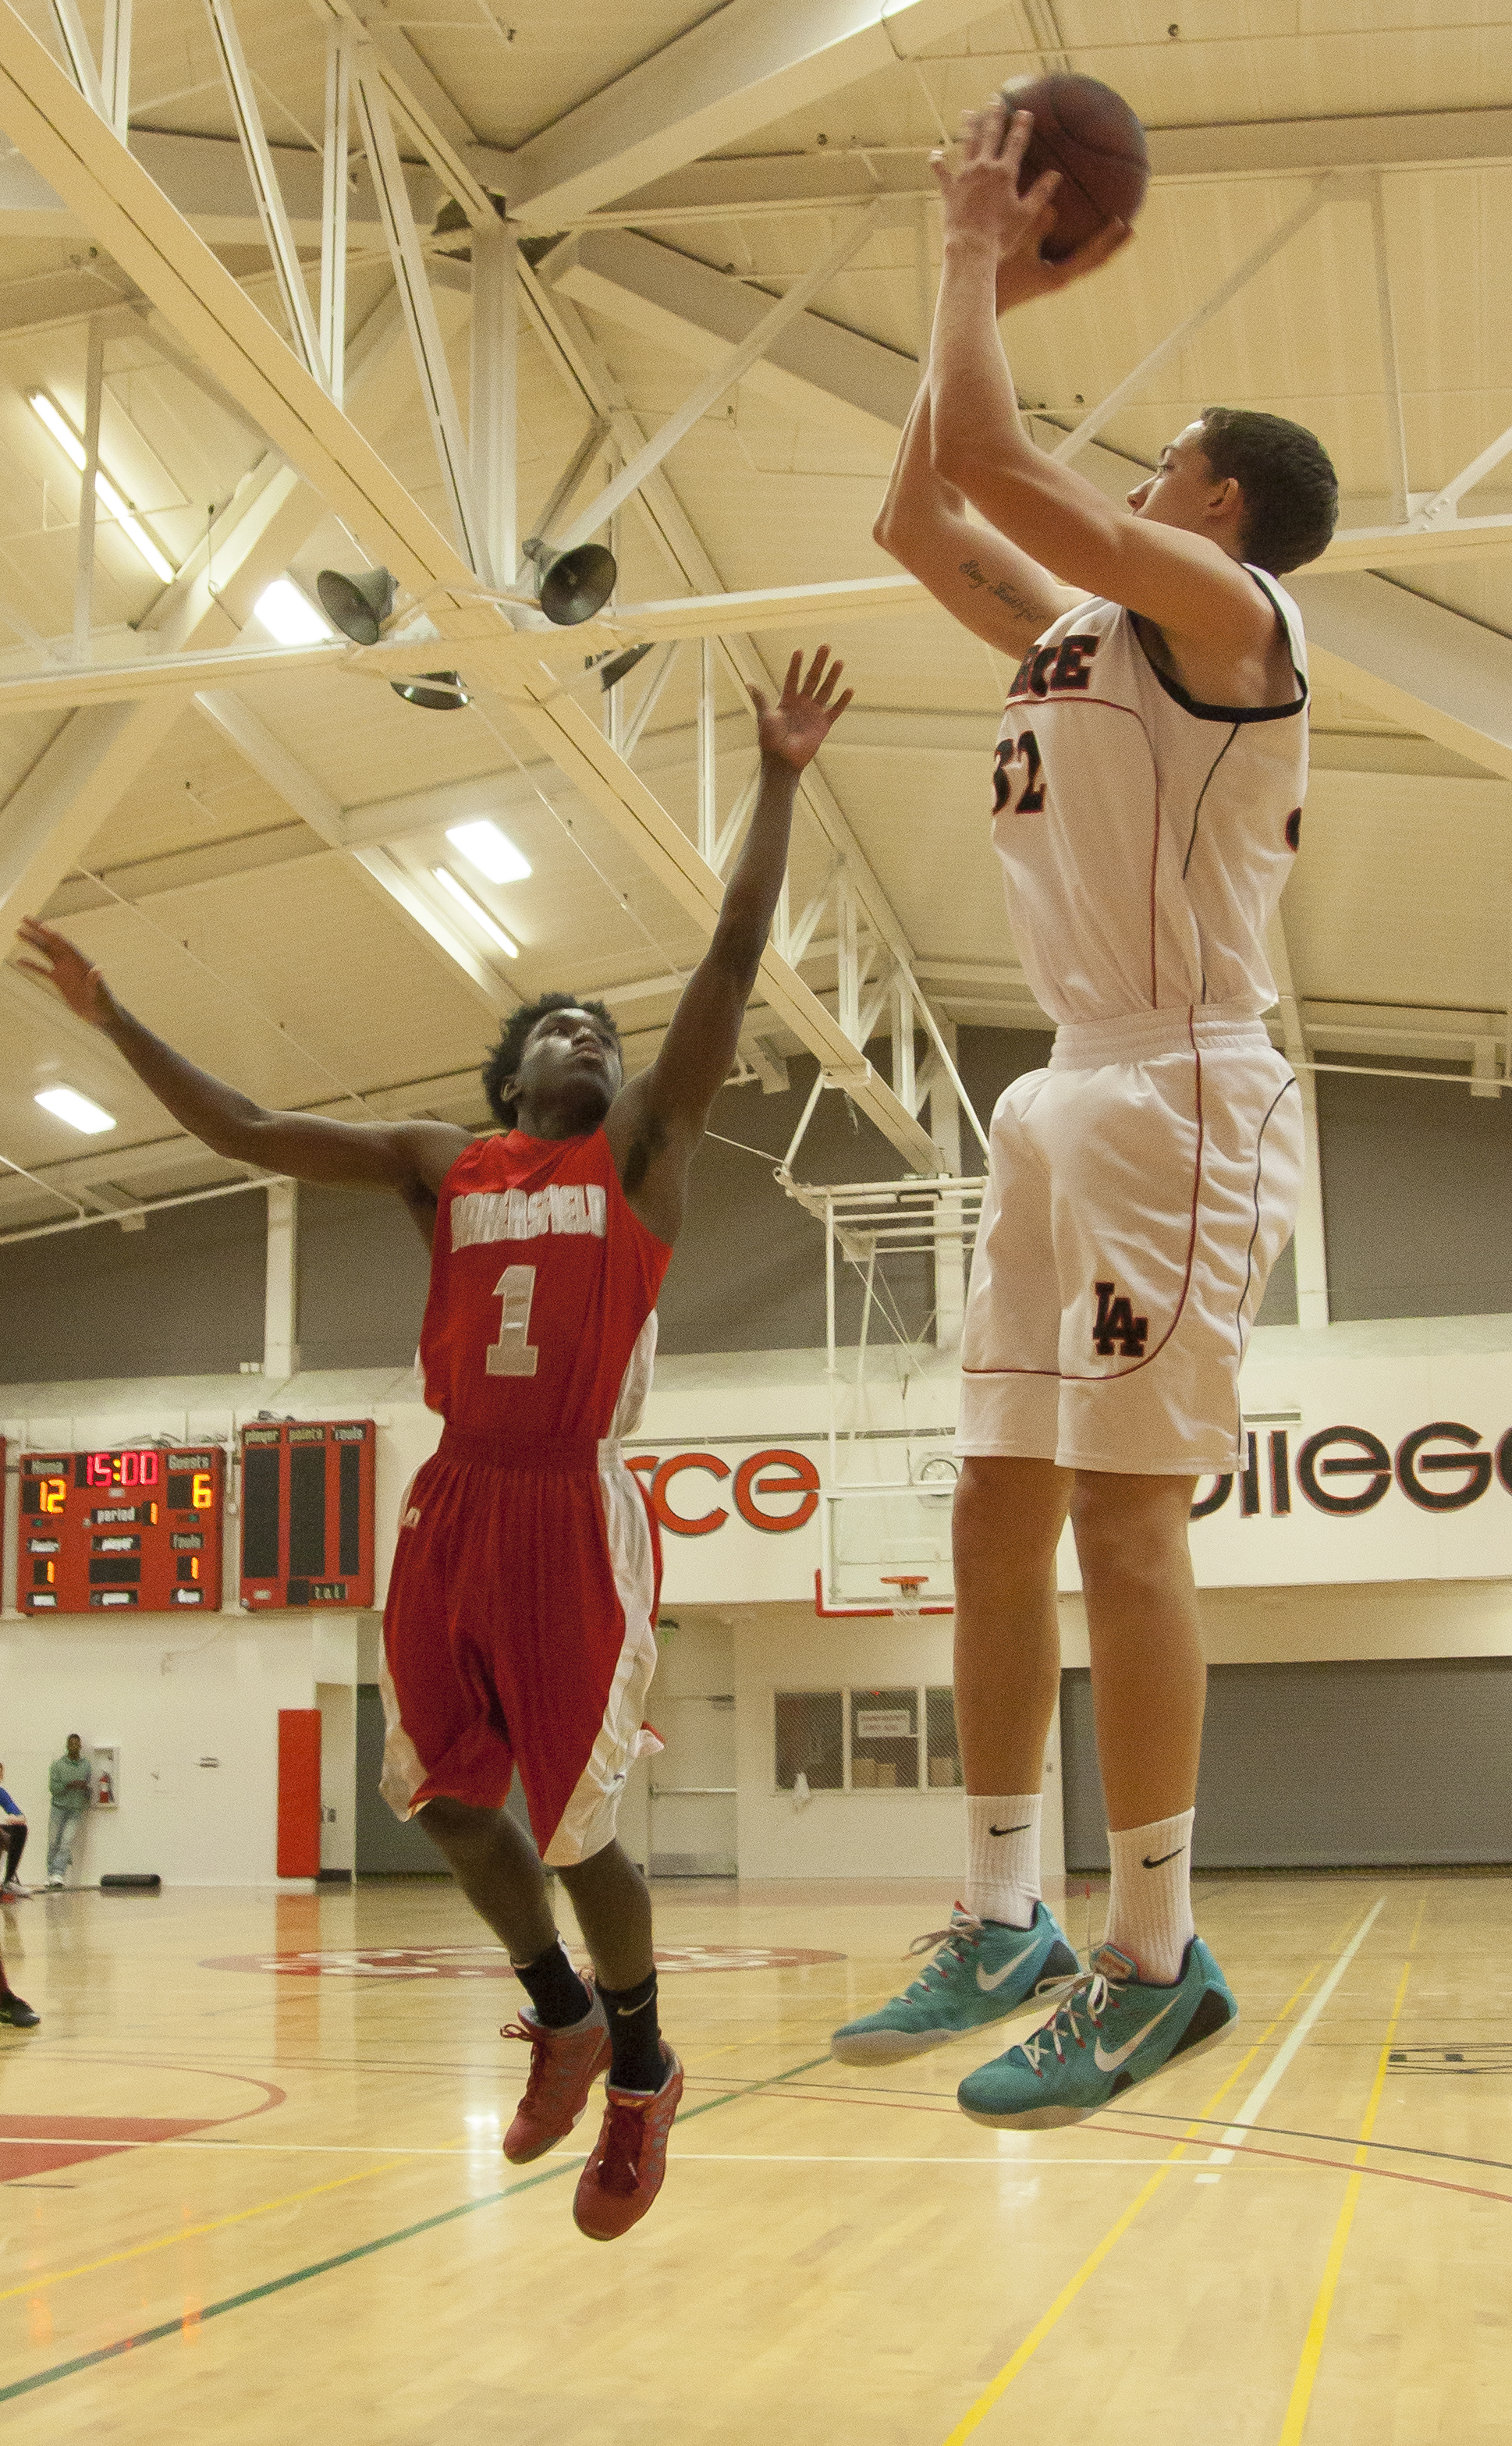  Pierce forward Trey Archambeau, shoots over Bakersfield College point guard Jameik Riviere in an important game that would decide which team advances to the playoffs. Pierce College would win the game in overtime, 95-92. Wednesday Feb. 25, 2015. Woo